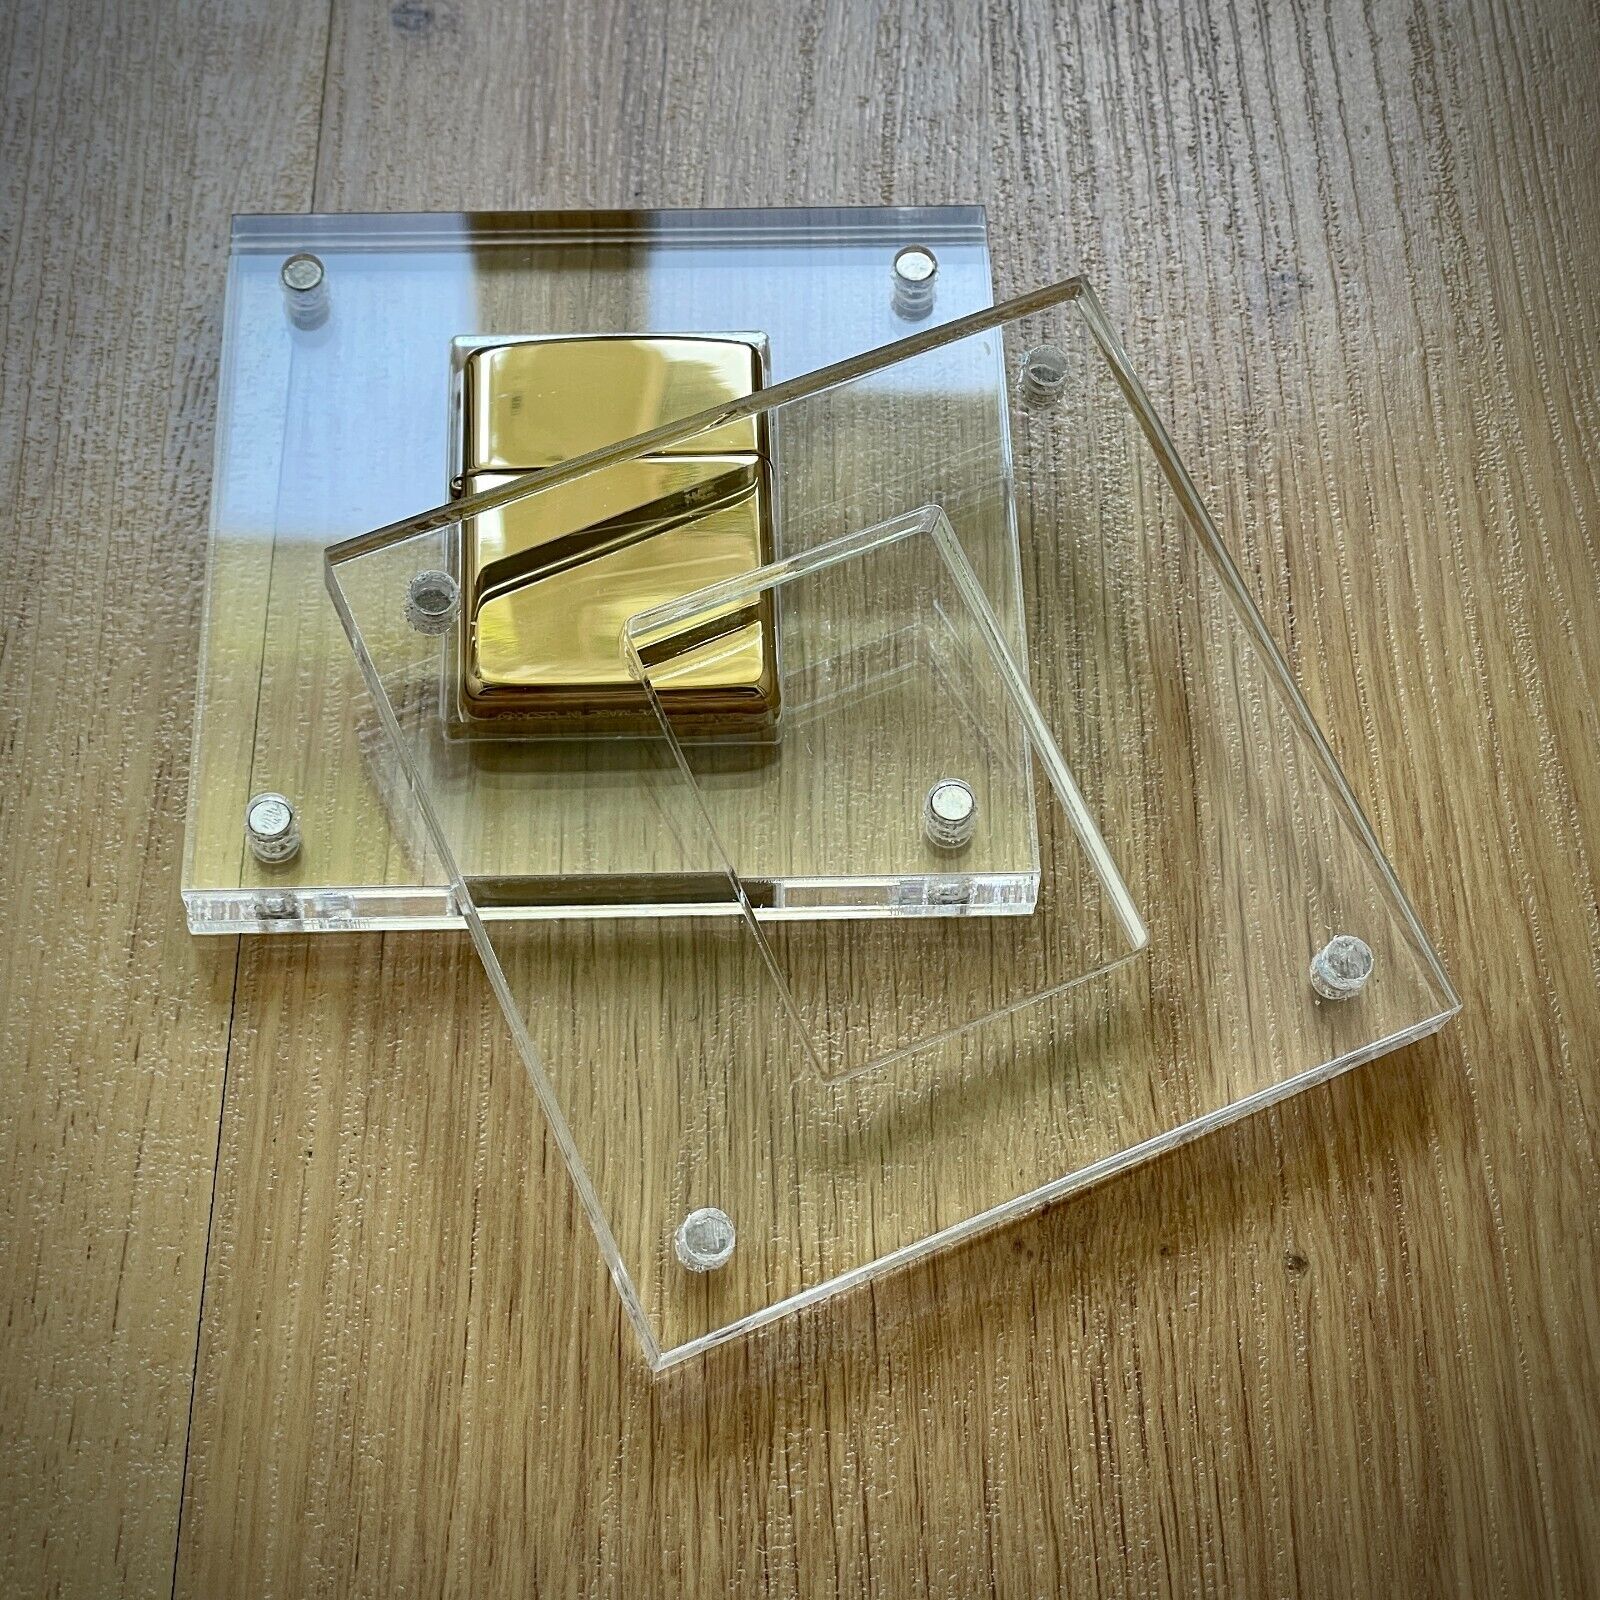 Acrylic Magnetic Display for Zippo lighters